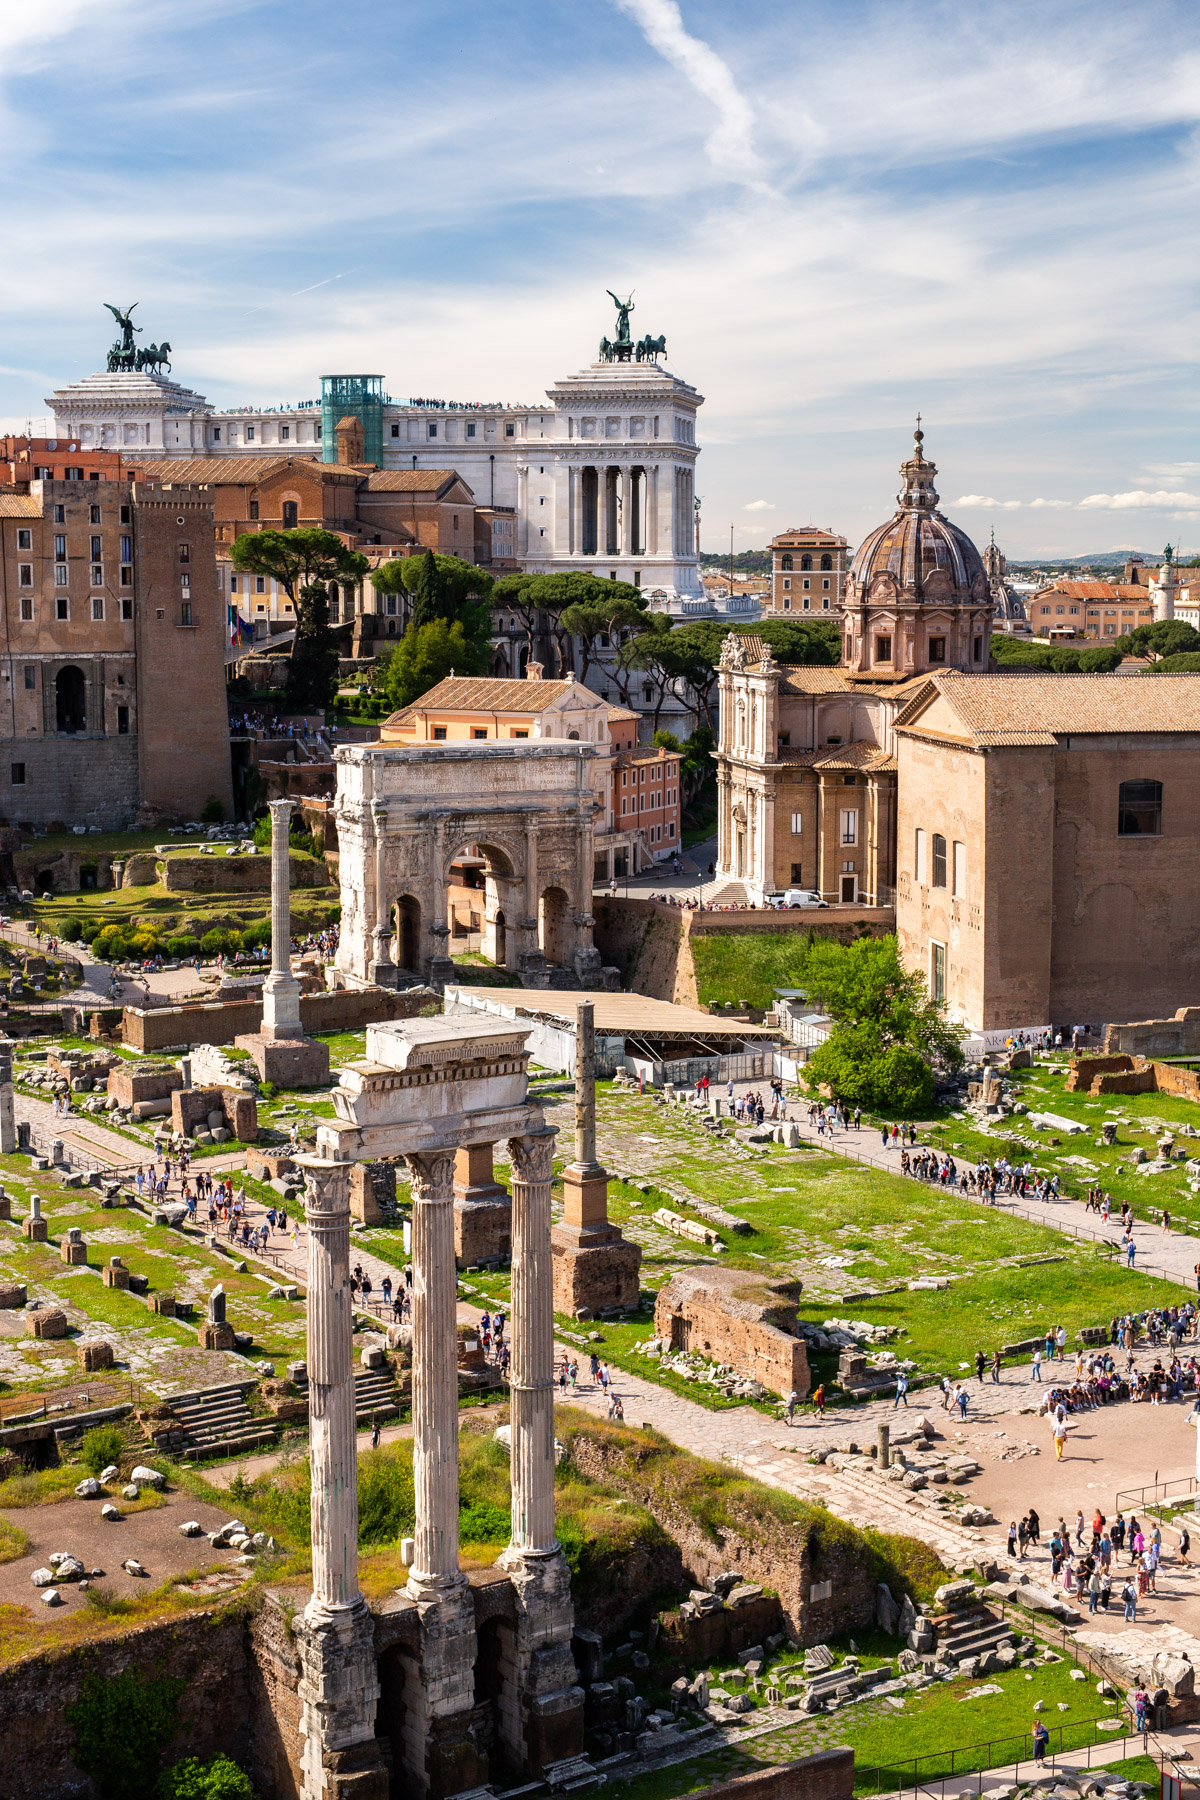 Best views in Rome
Palatine Hill